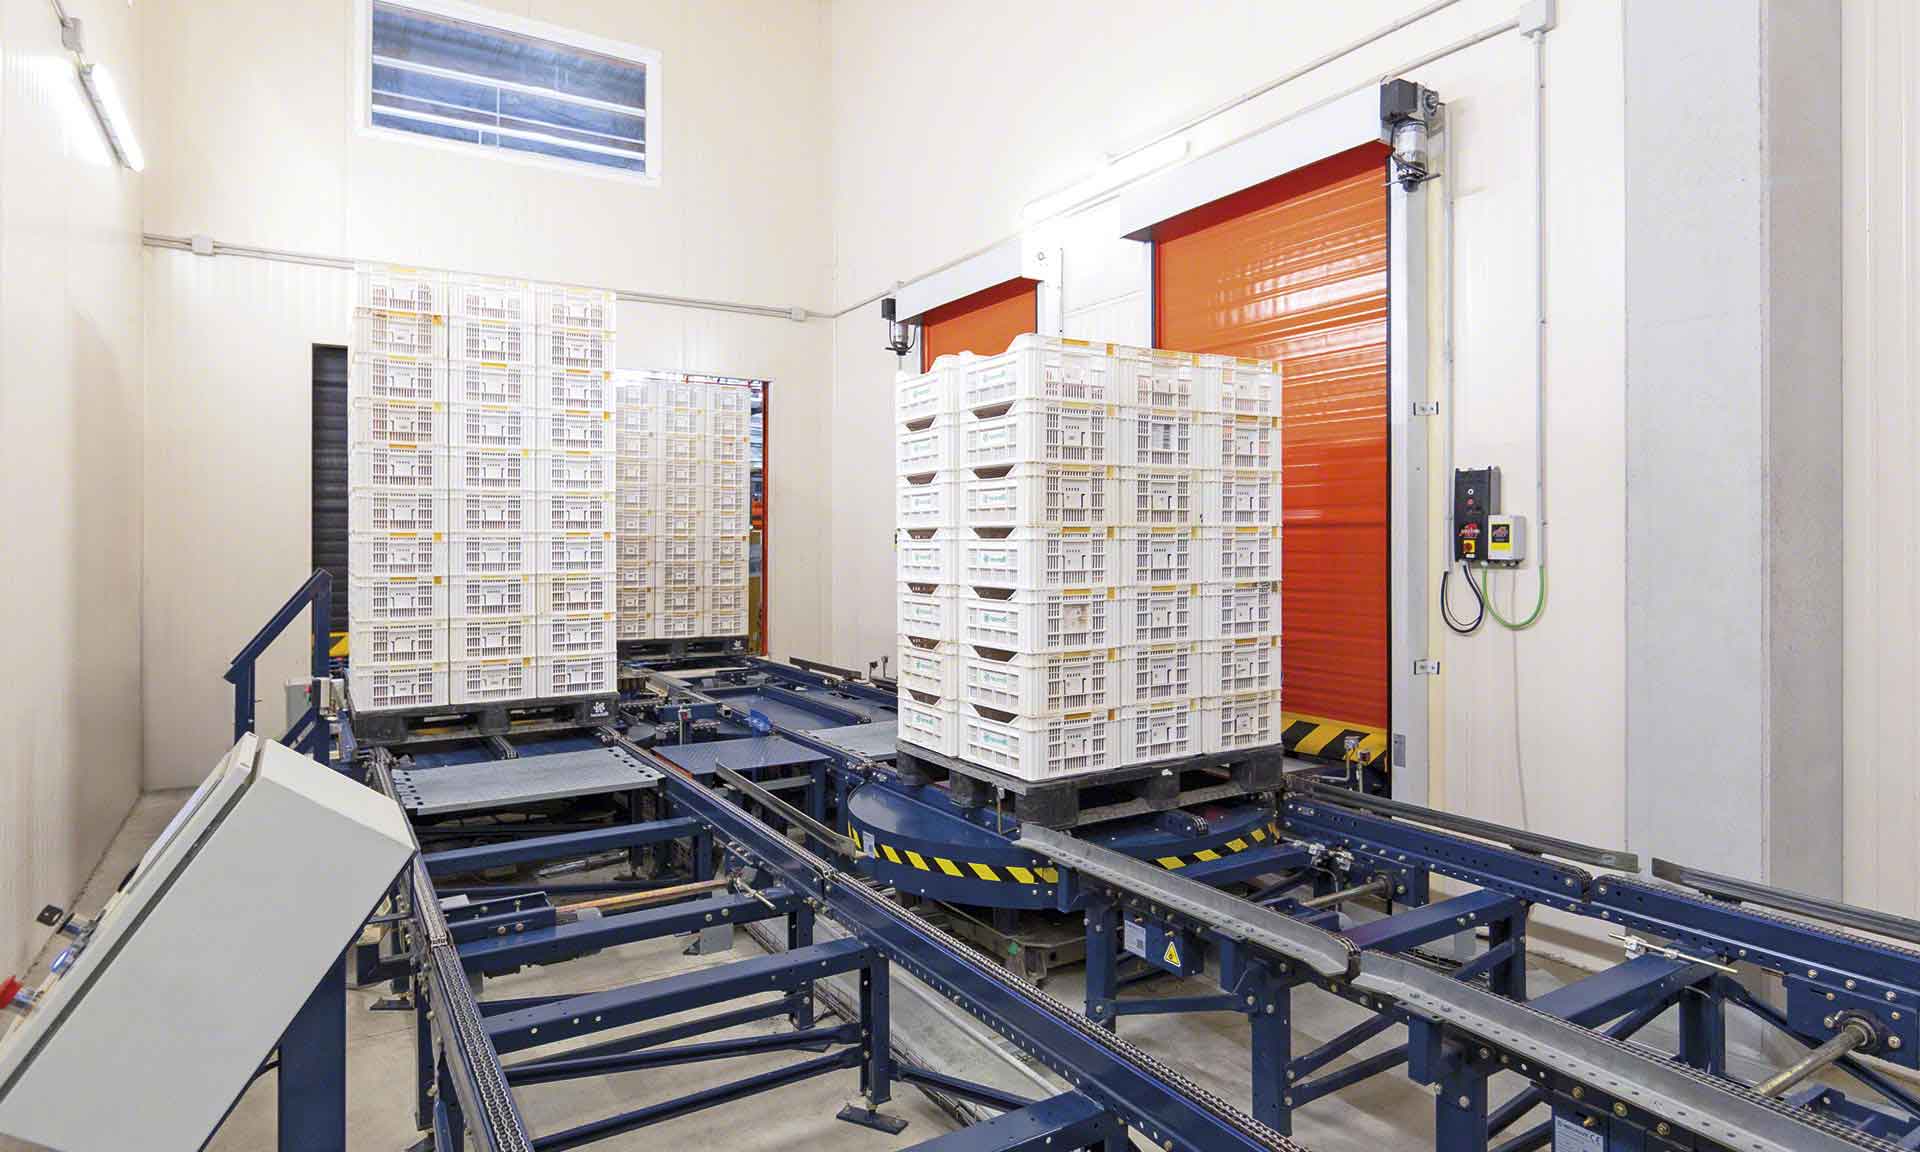 Cold storage distributor optimizes rack to continue expansion